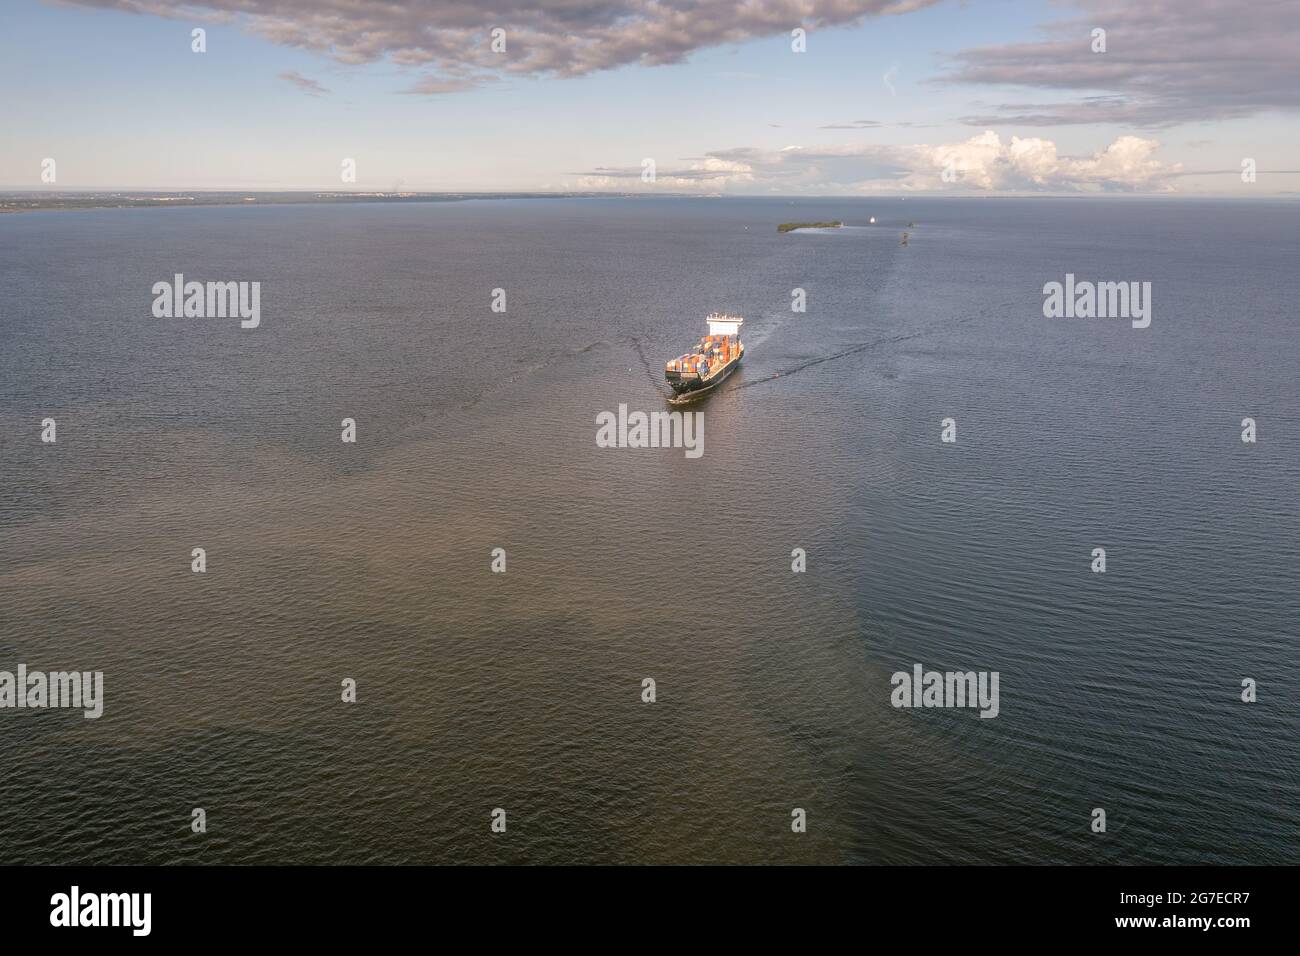 Large loaded container ship sailing high seas. Aerial high angle view, hdr image Stock Photo